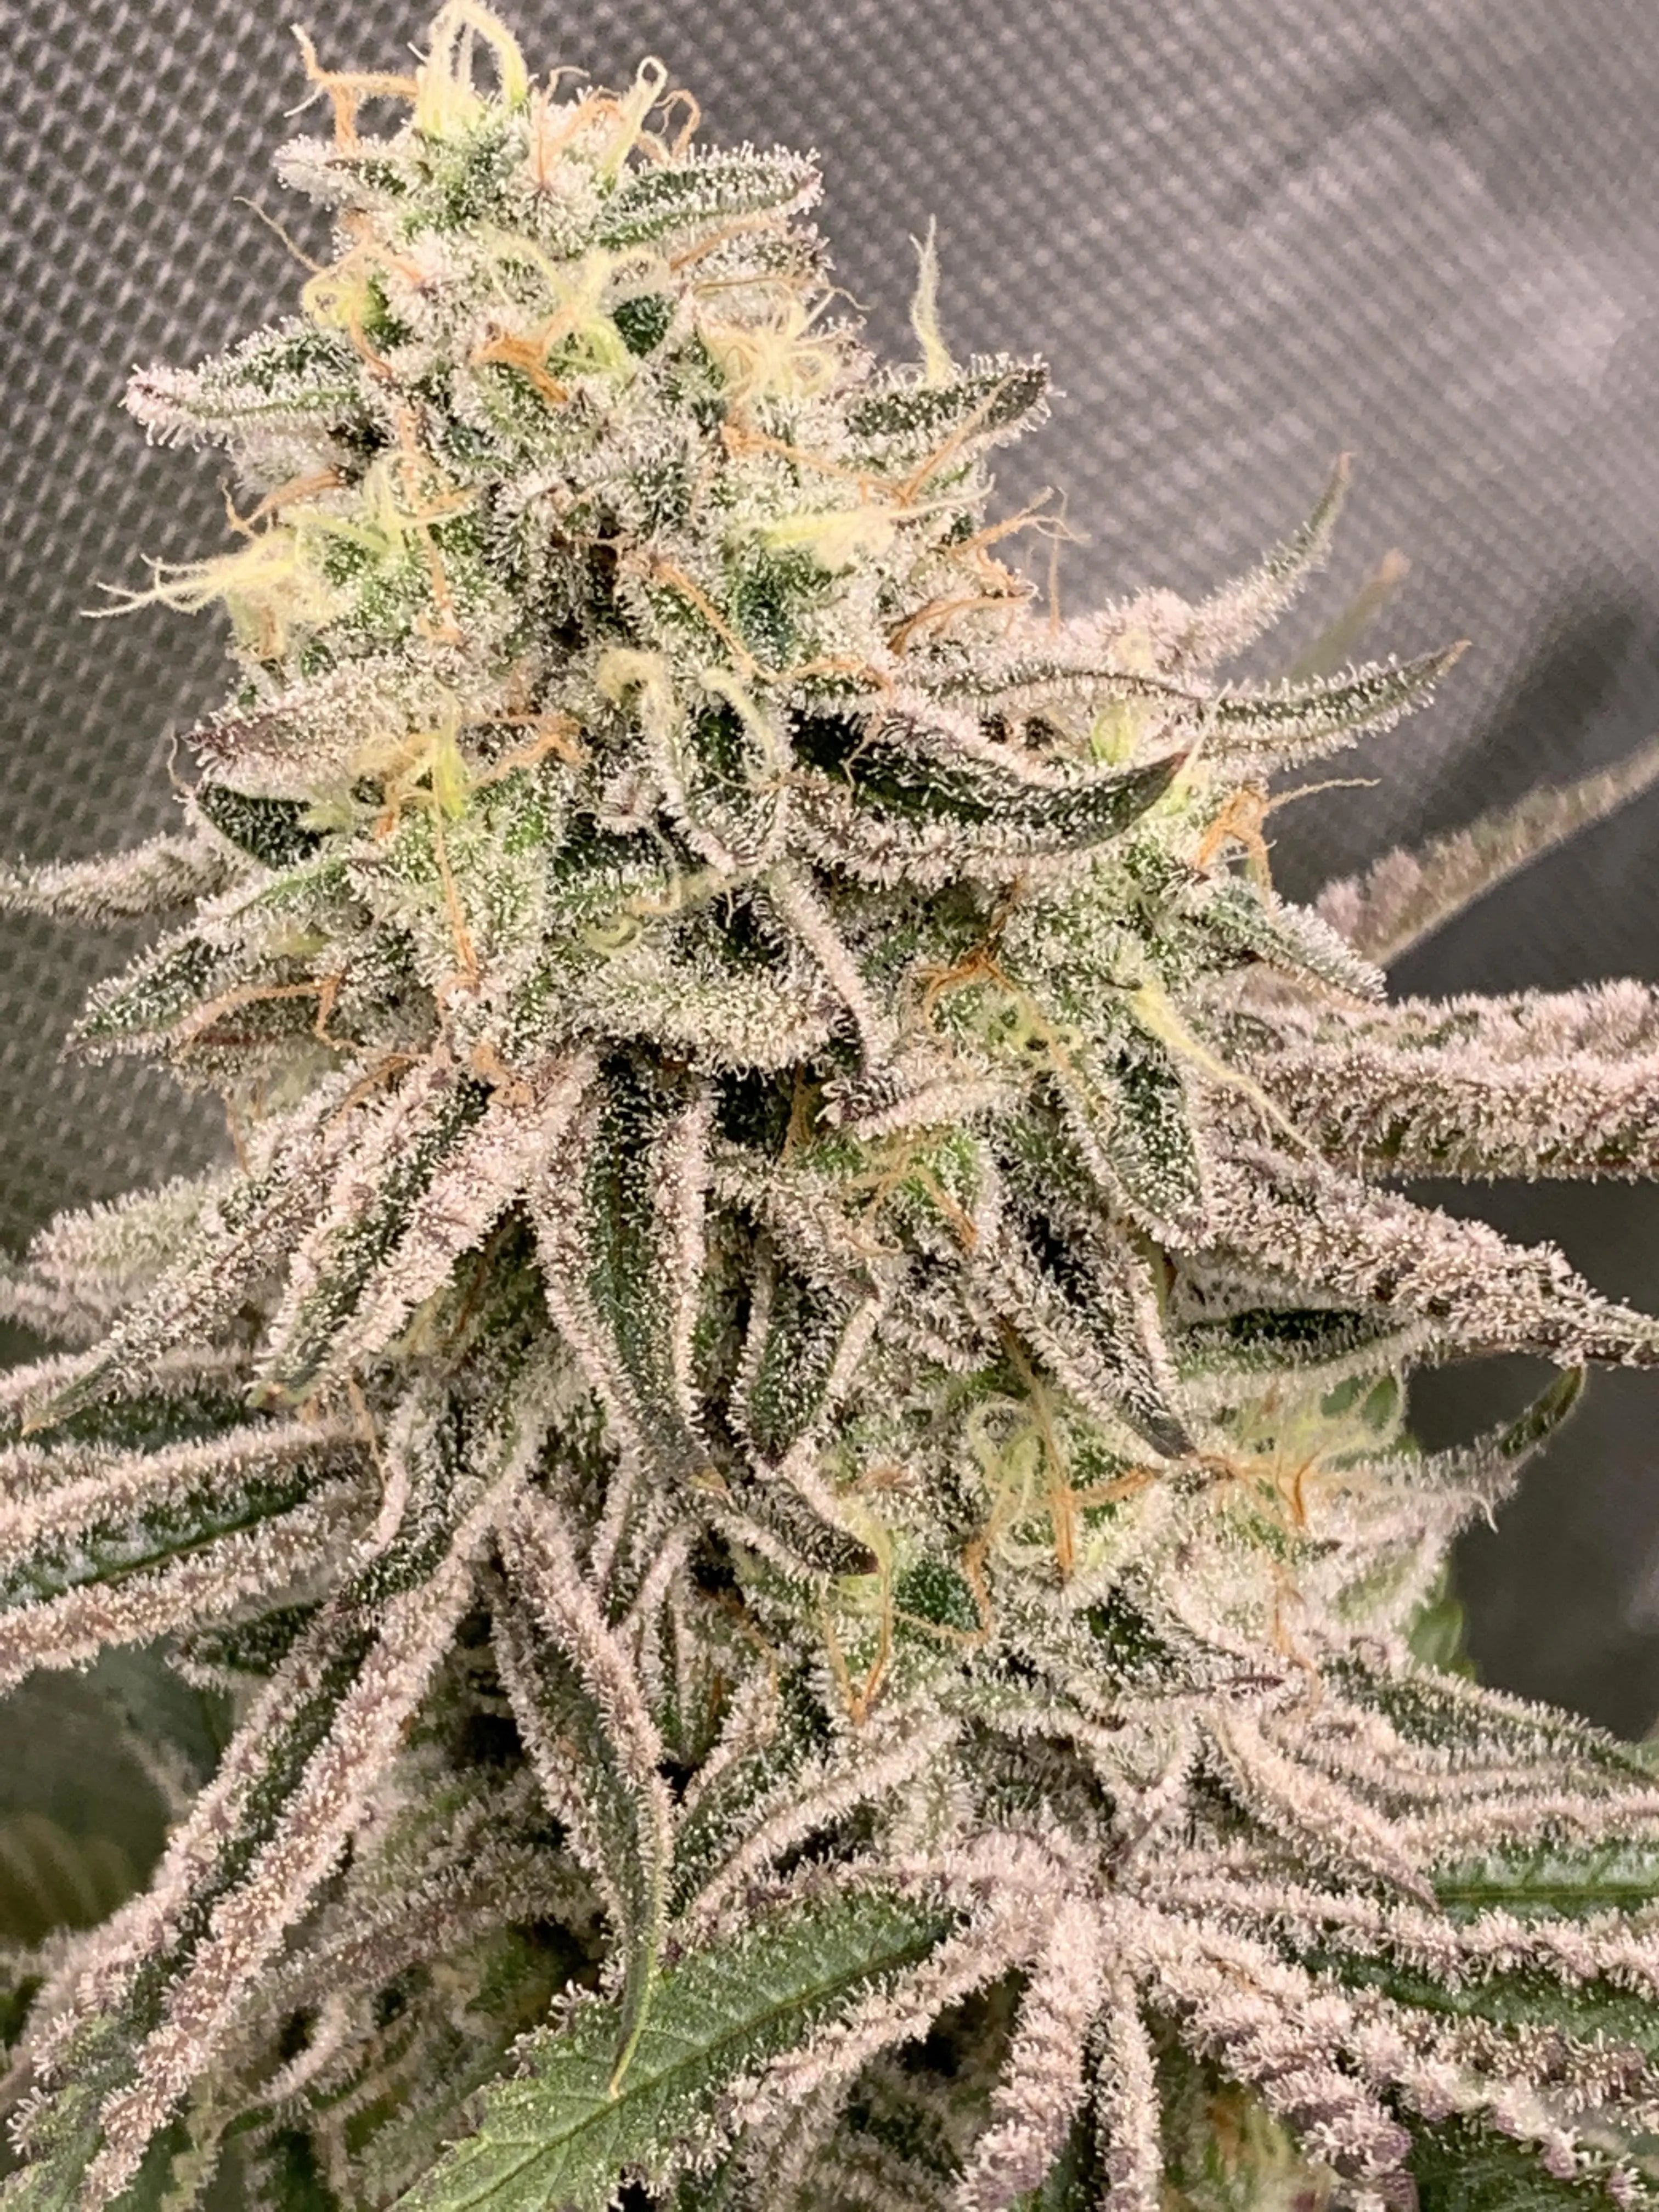 Candy Cane Autoflowering Cannabis Seeds By Crop King Seeds Crop King Seeds